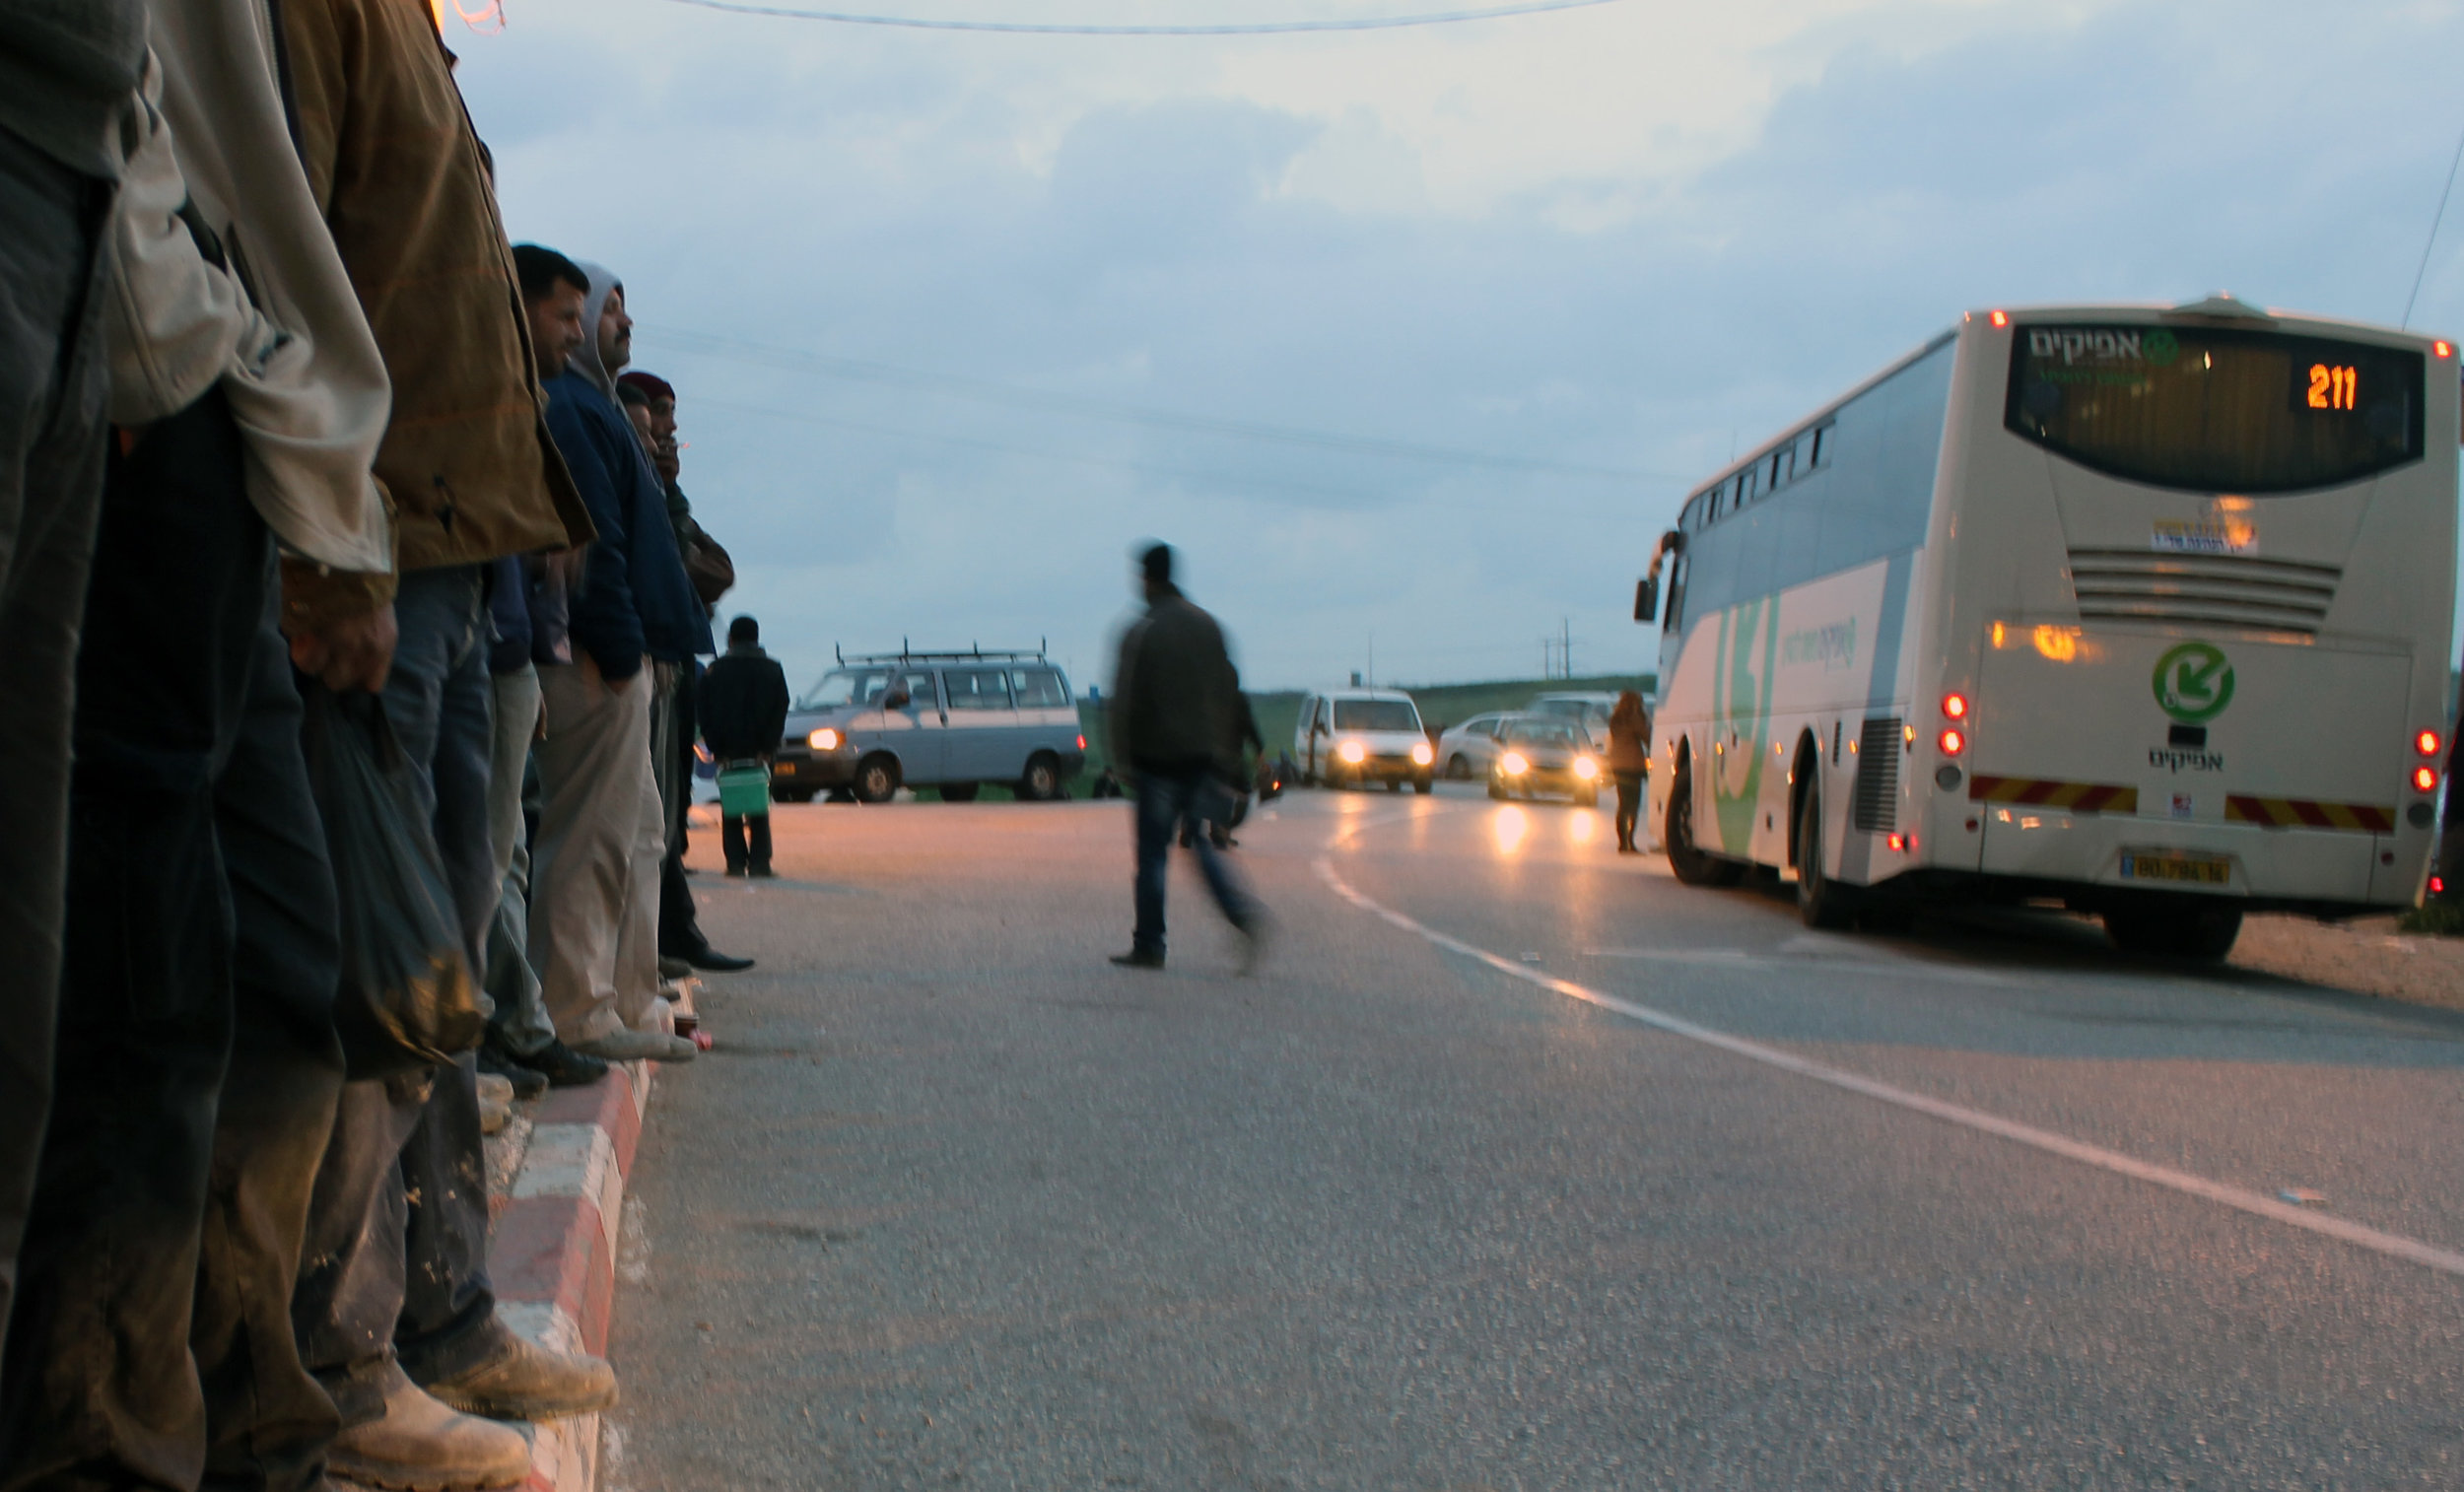 20130305 - Palestinian workers at curb waiting for bus.jpg